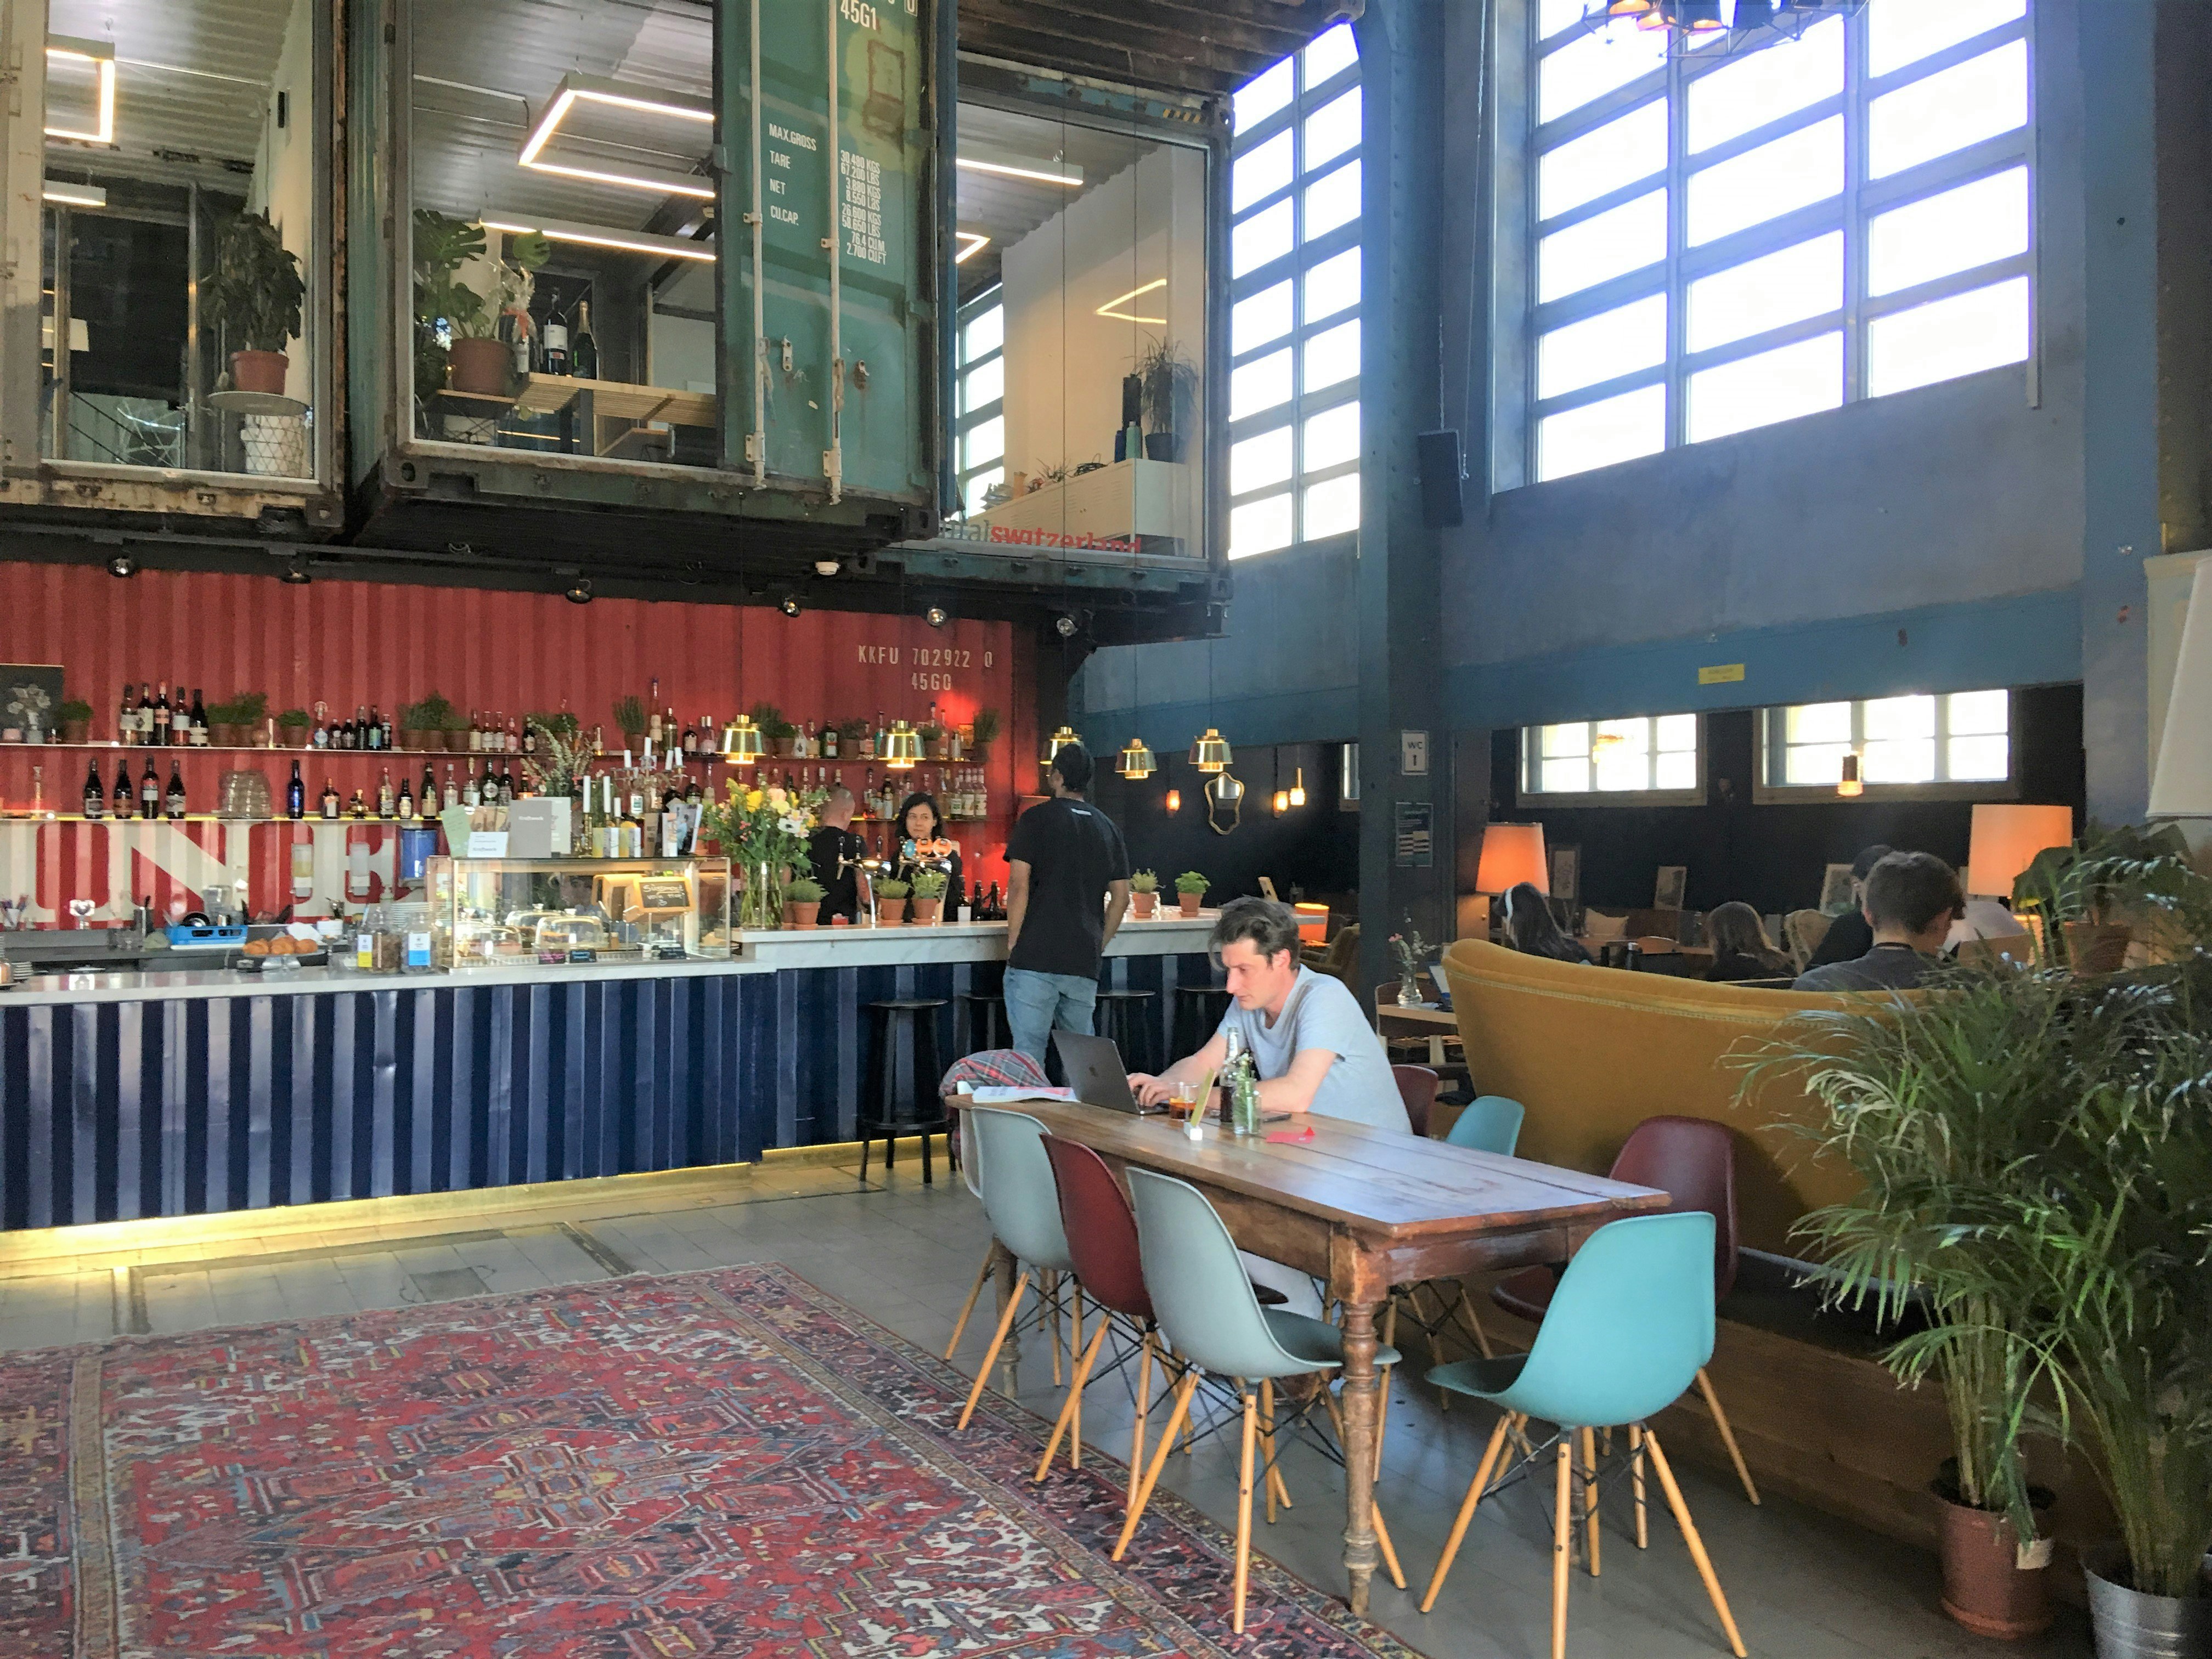 The high-ceilinged interior of Kraftwerk: the bar and some of the walls are made of colourful old shipping containers, while the exterior wall has windows high up; a customer is working at a wooden table next to a large patterned rug covering the floor. 